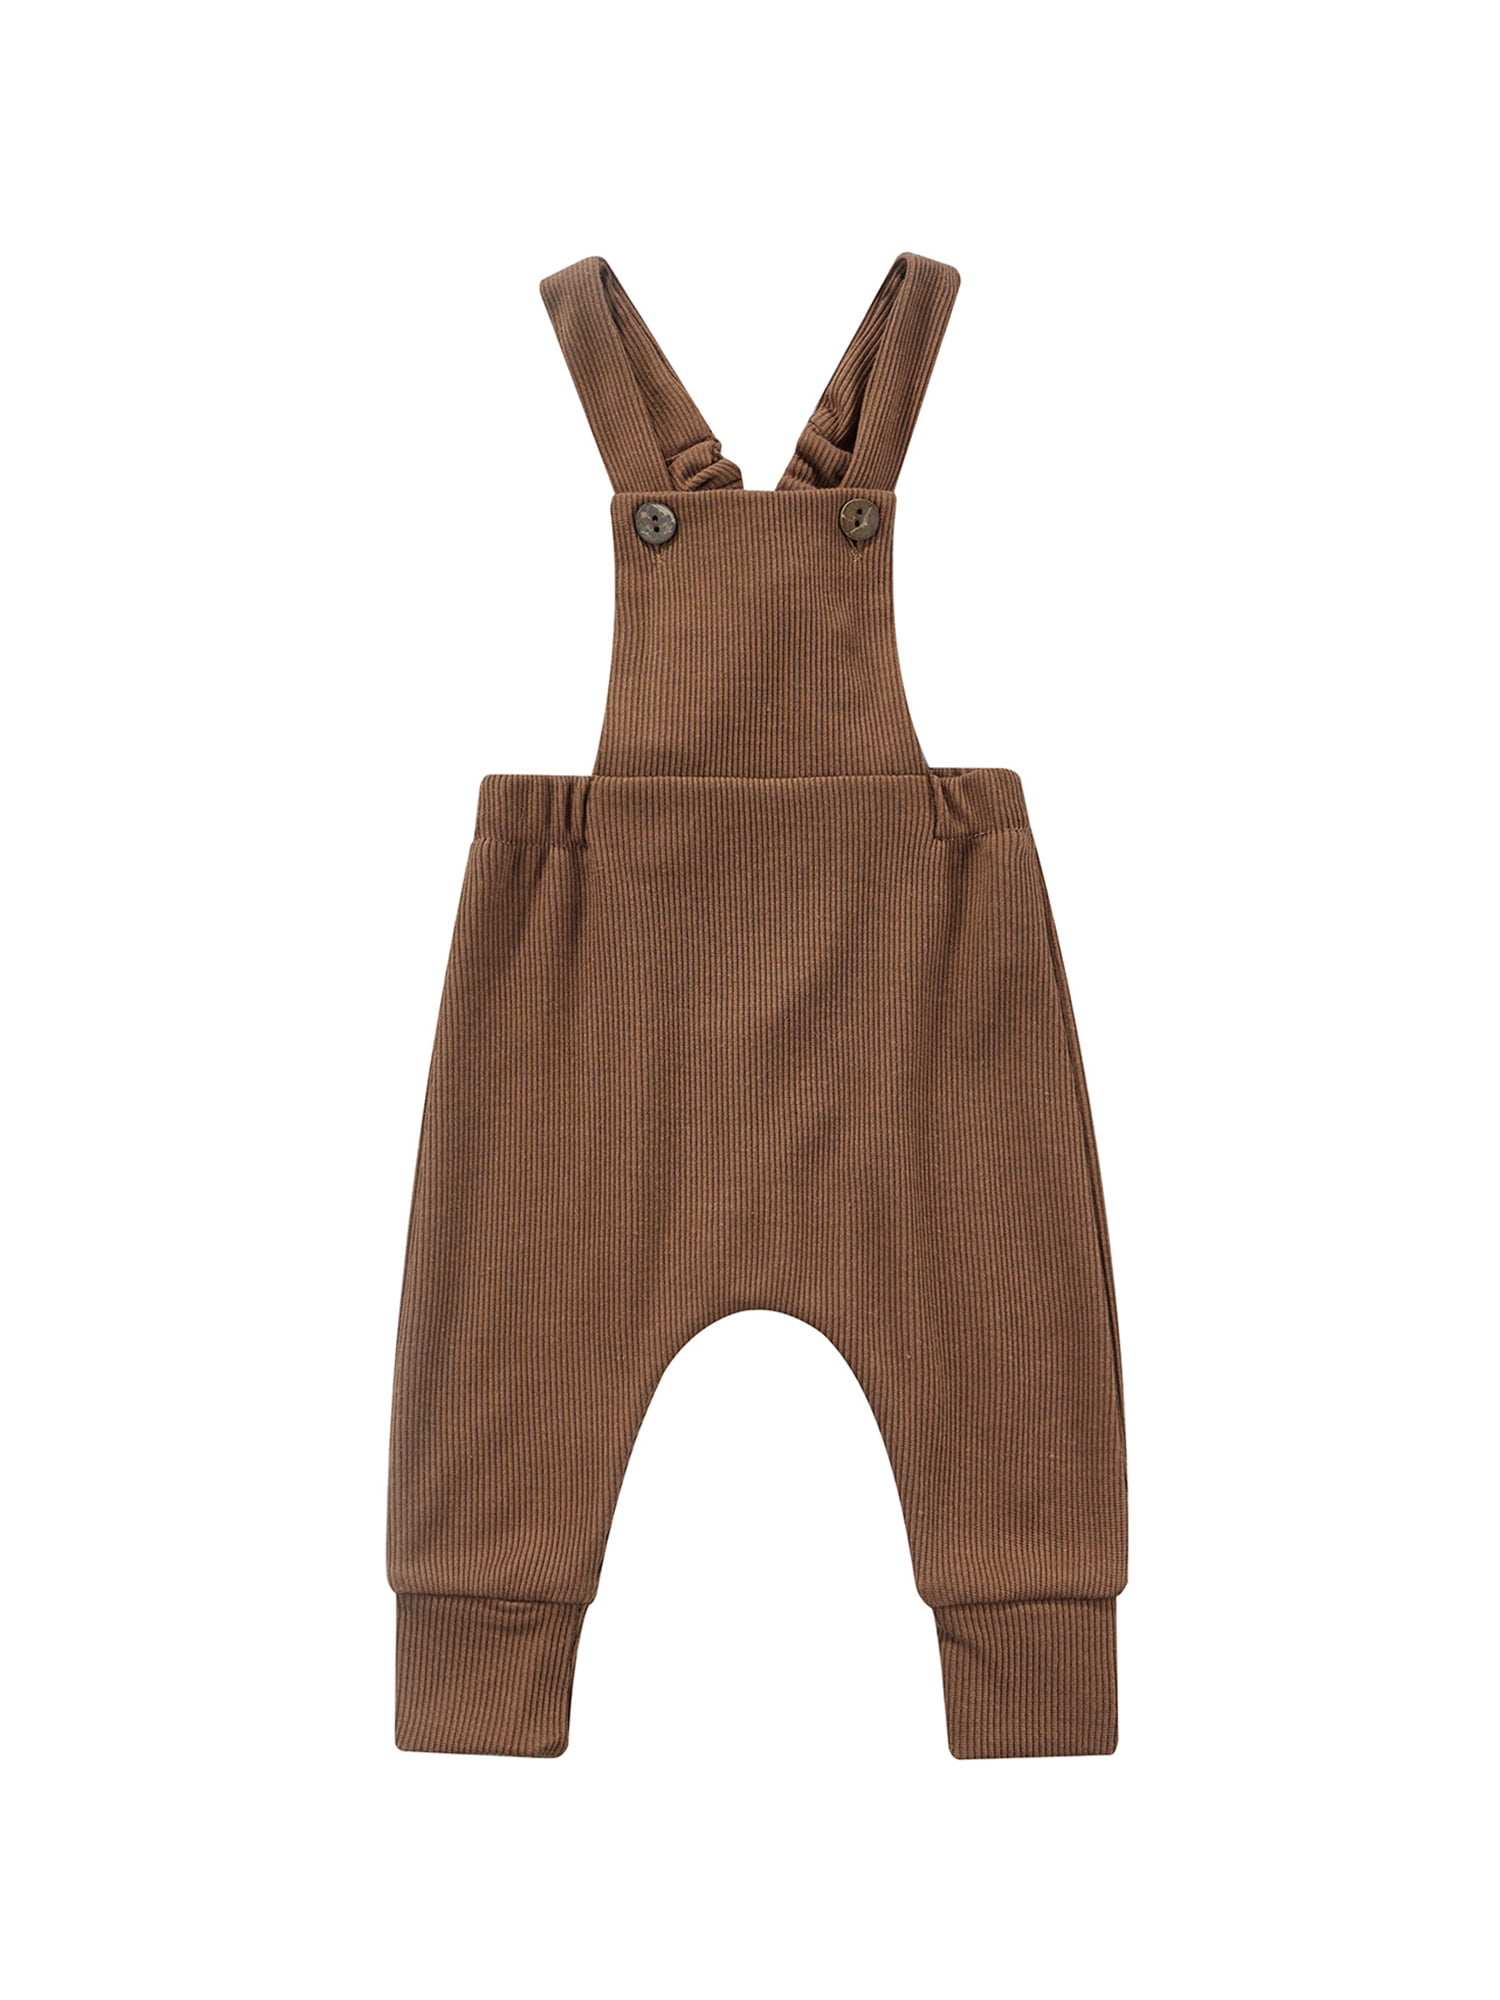  Newborn Baby Boy Girl Romper Sleeveless Crew Neck Plaid  Patterns One-Piece Long Jumpsuit Boysuit (Brown, 0-6 Months): Clothing,  Shoes & Jewelry